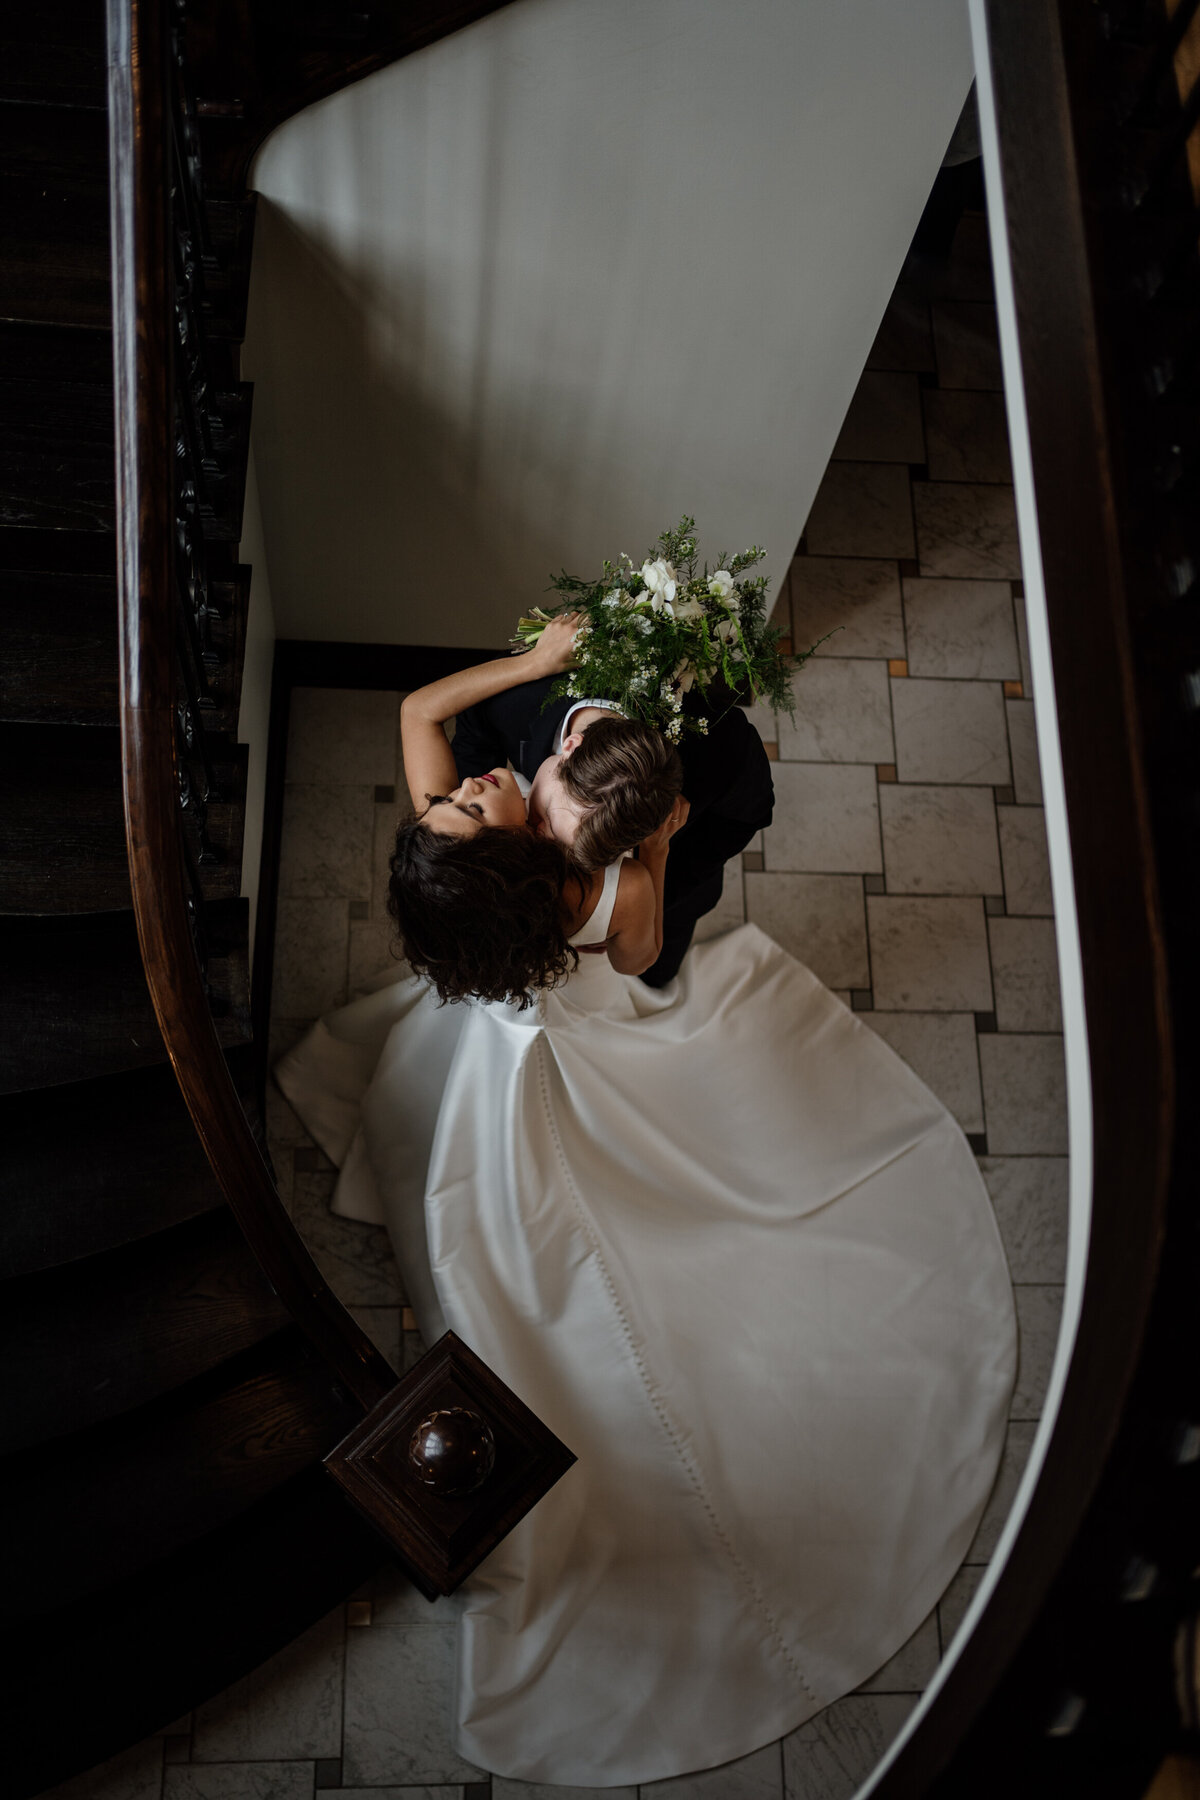 Aspen-Avenue-Chicago-Wedding-Photographer-Wedding-Modern-Editoral-Bride-Groom-Romantic-Stairs-Dearly-Loved-Bridal-Venue3two-Mansion-Cass-and-Jean-Flowers